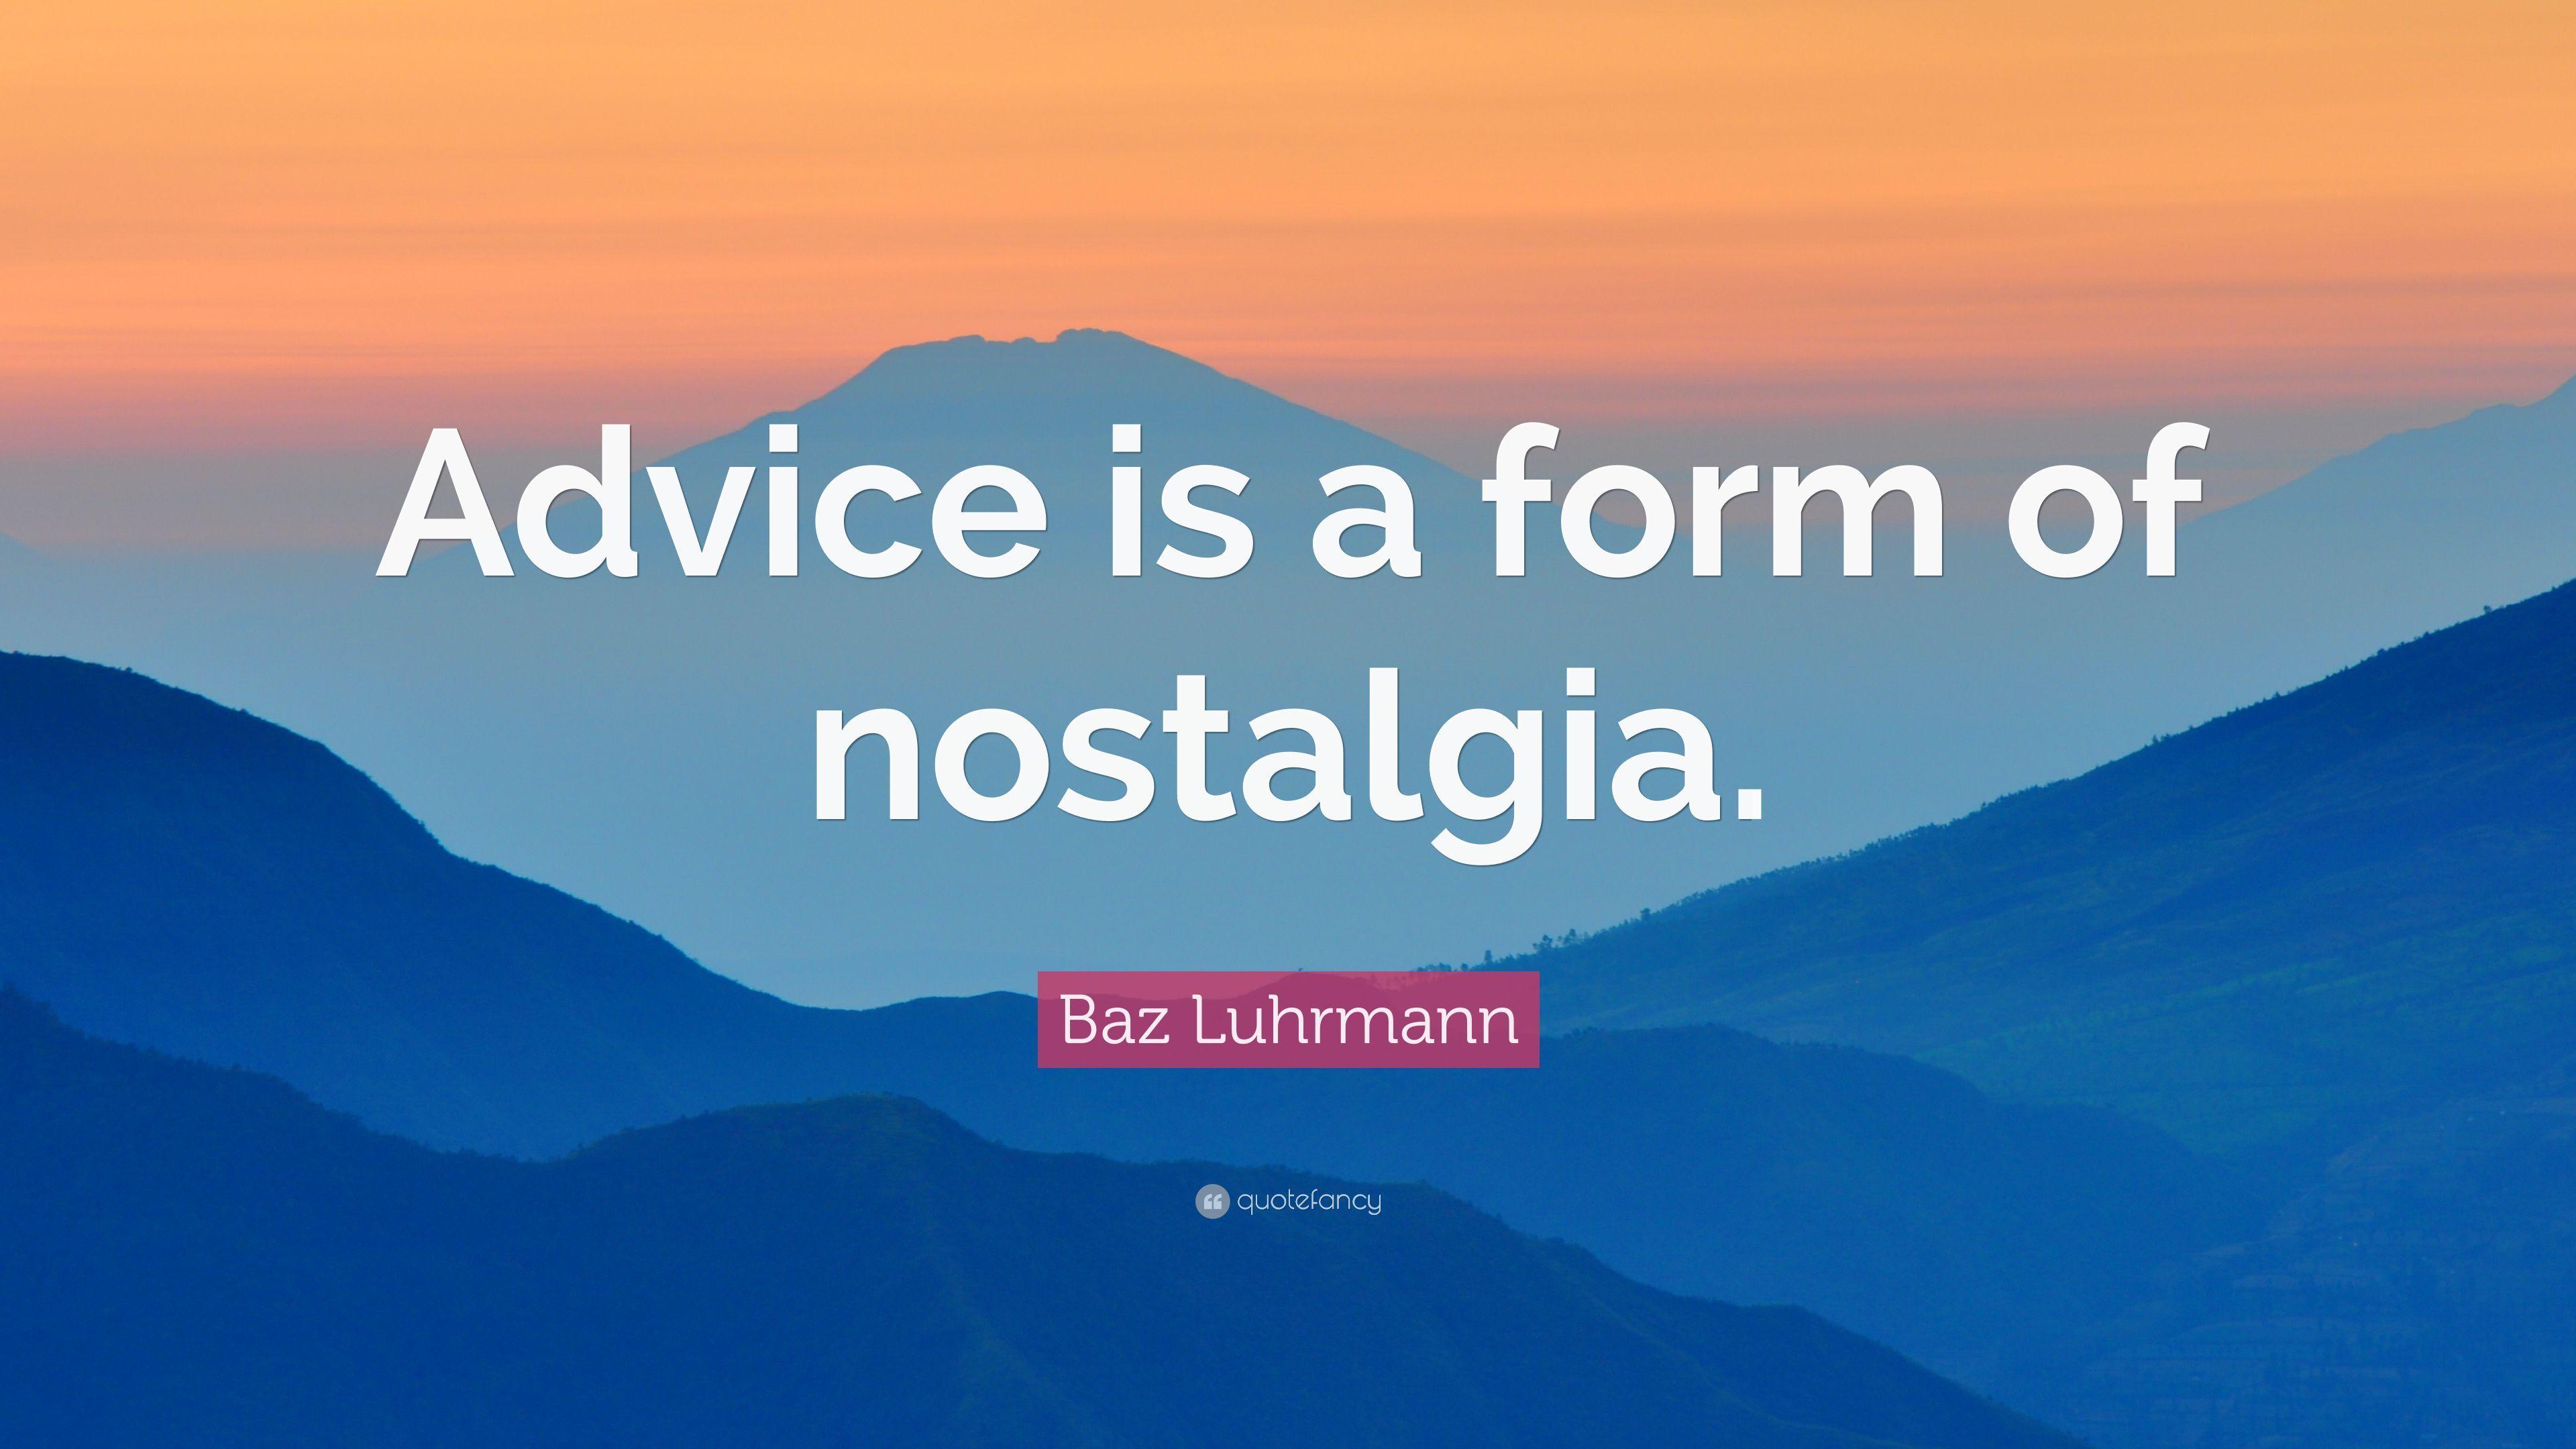 Baz Luhrmann Quote: “Advice is a form of nostalgia.” 5 wallpaper